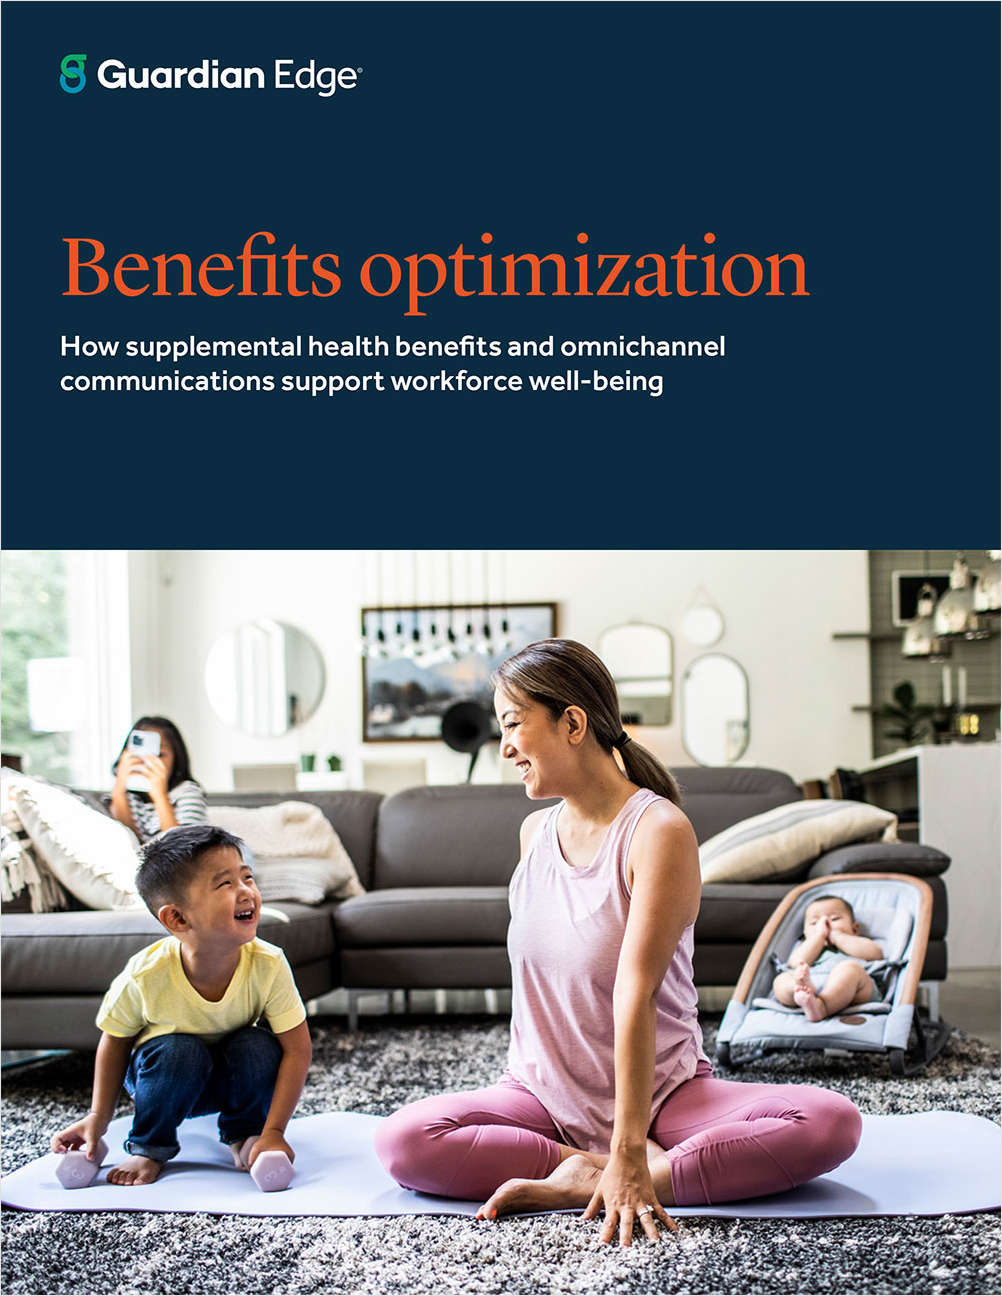 Benefits Optimization: How Supplemental Health Benefits & Omnichannel Communications Support Workforce Well-Being for Employer Clients